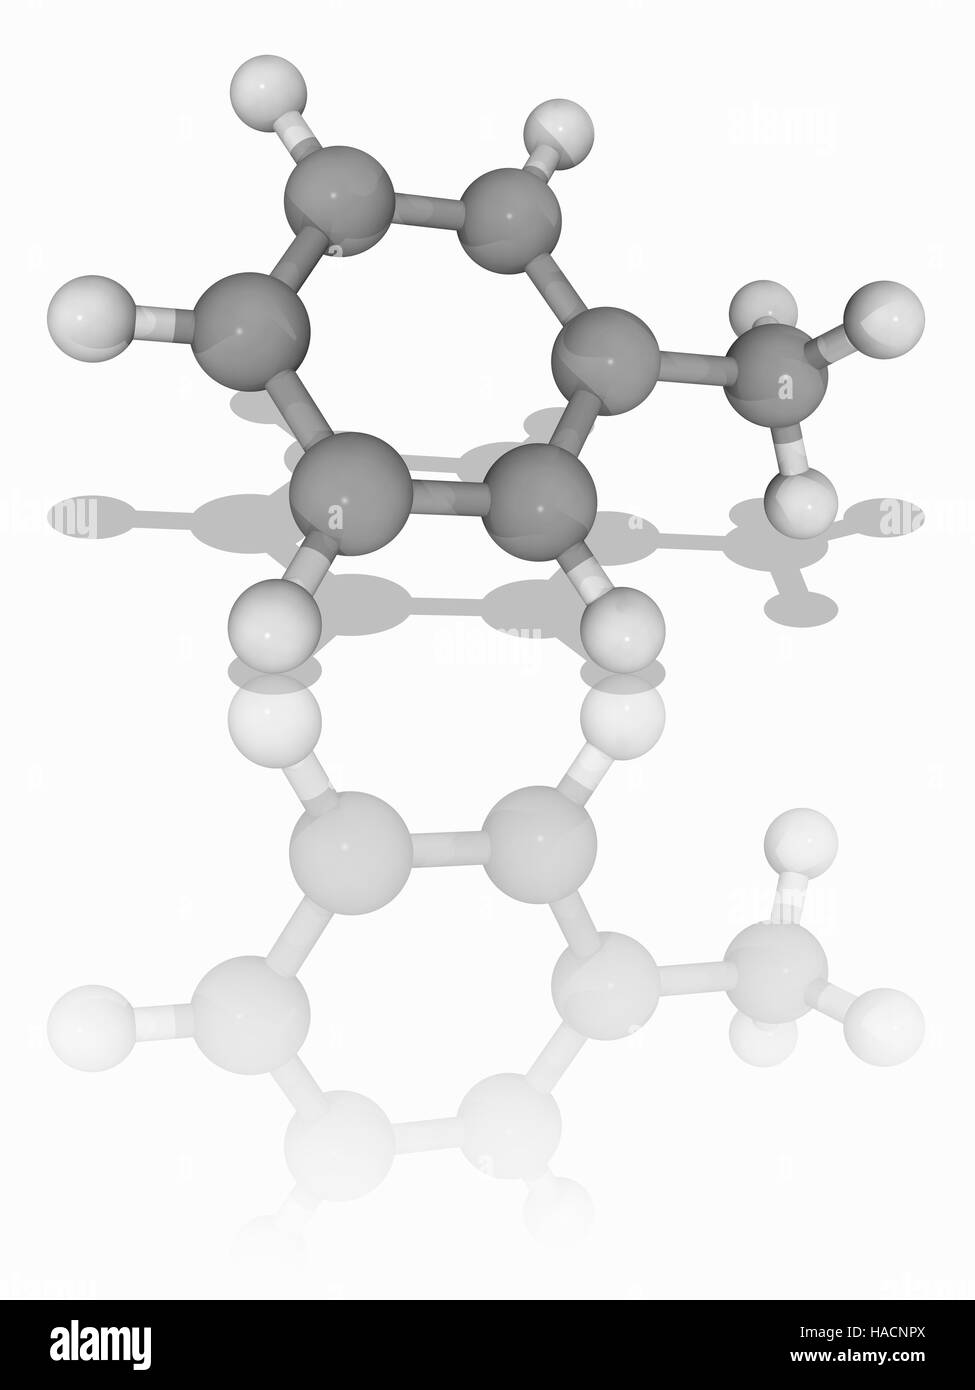 Toluene. Molecular model of the aromatic hydrocarbon toluene (C7.H8), widely used as an industrial feedstock and as a solvent. Other names include methylbenzene and phenylmethane. Atoms are represented as spheres and are colour-coded: carbon (grey) and hydrogen (white). Illustration. Stock Photo